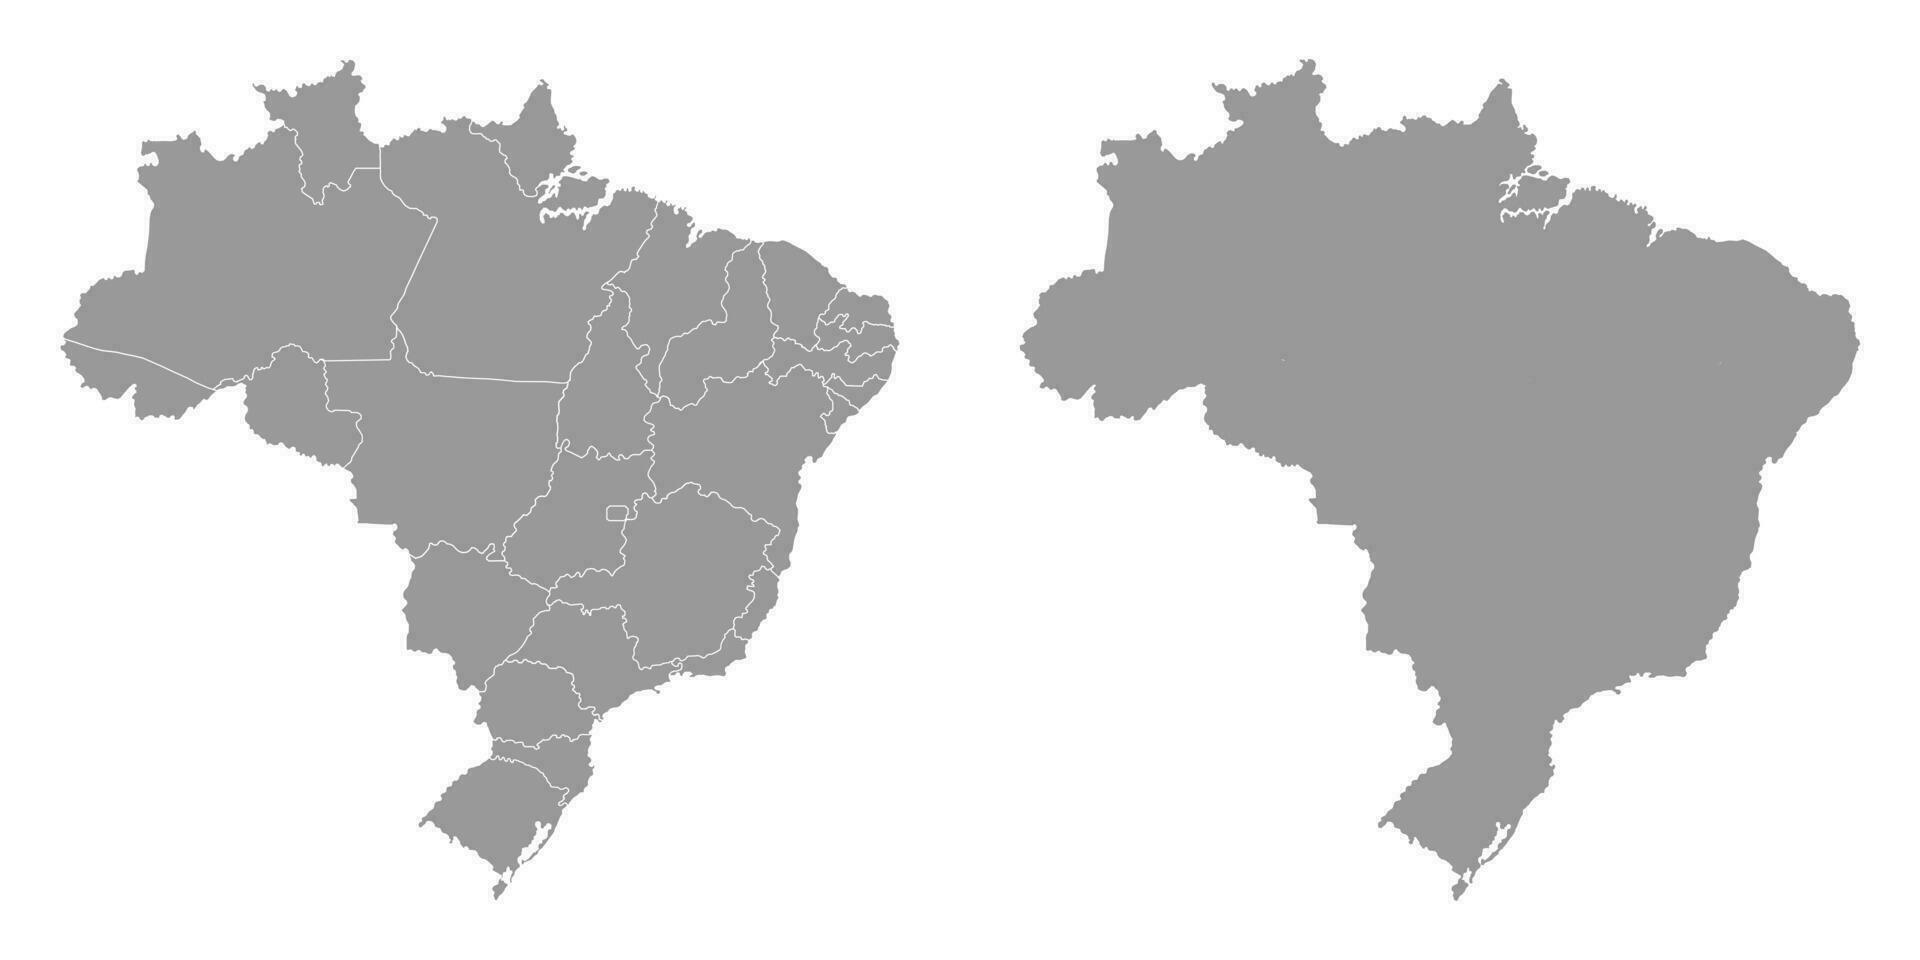 Brazil grey map with states. Vector Illustration.